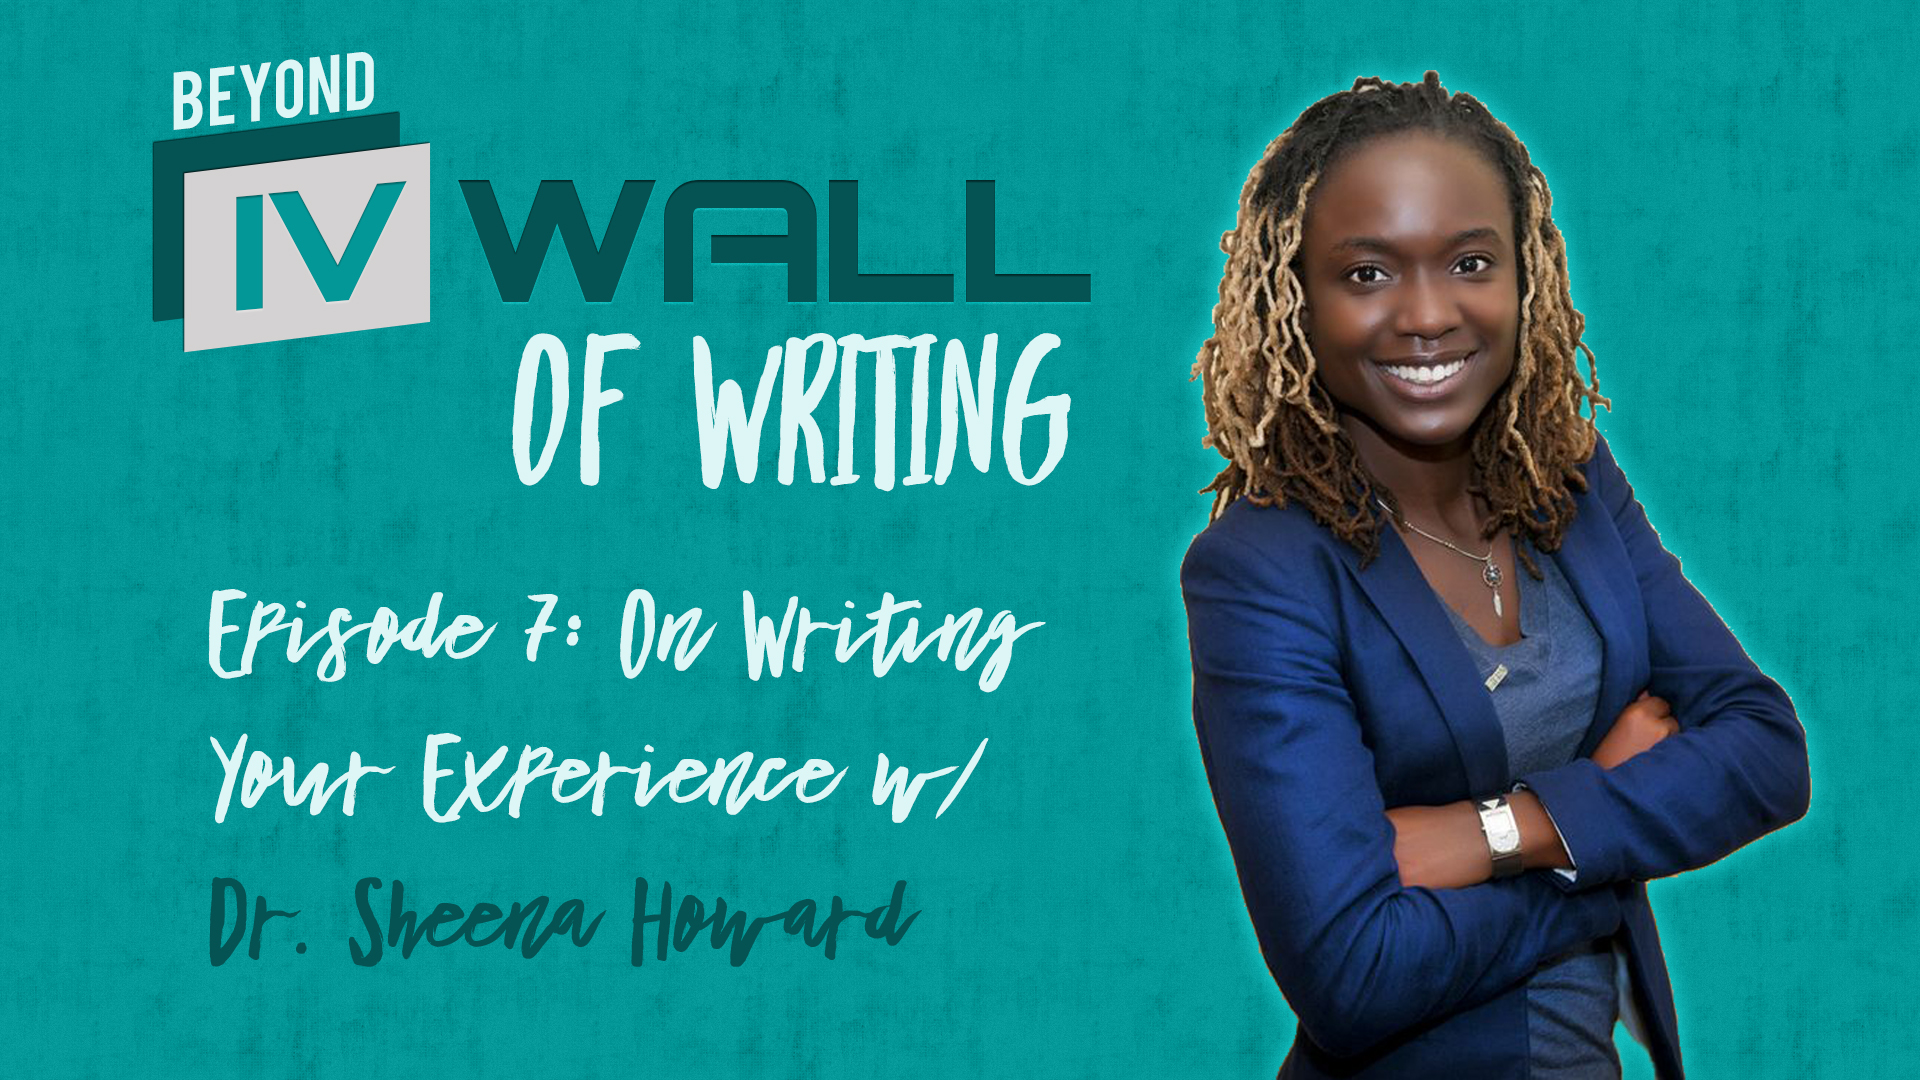 Beyond the IVWall of Writing: Episode 7- On Writing Your Experience with Dr. Sheena Howard